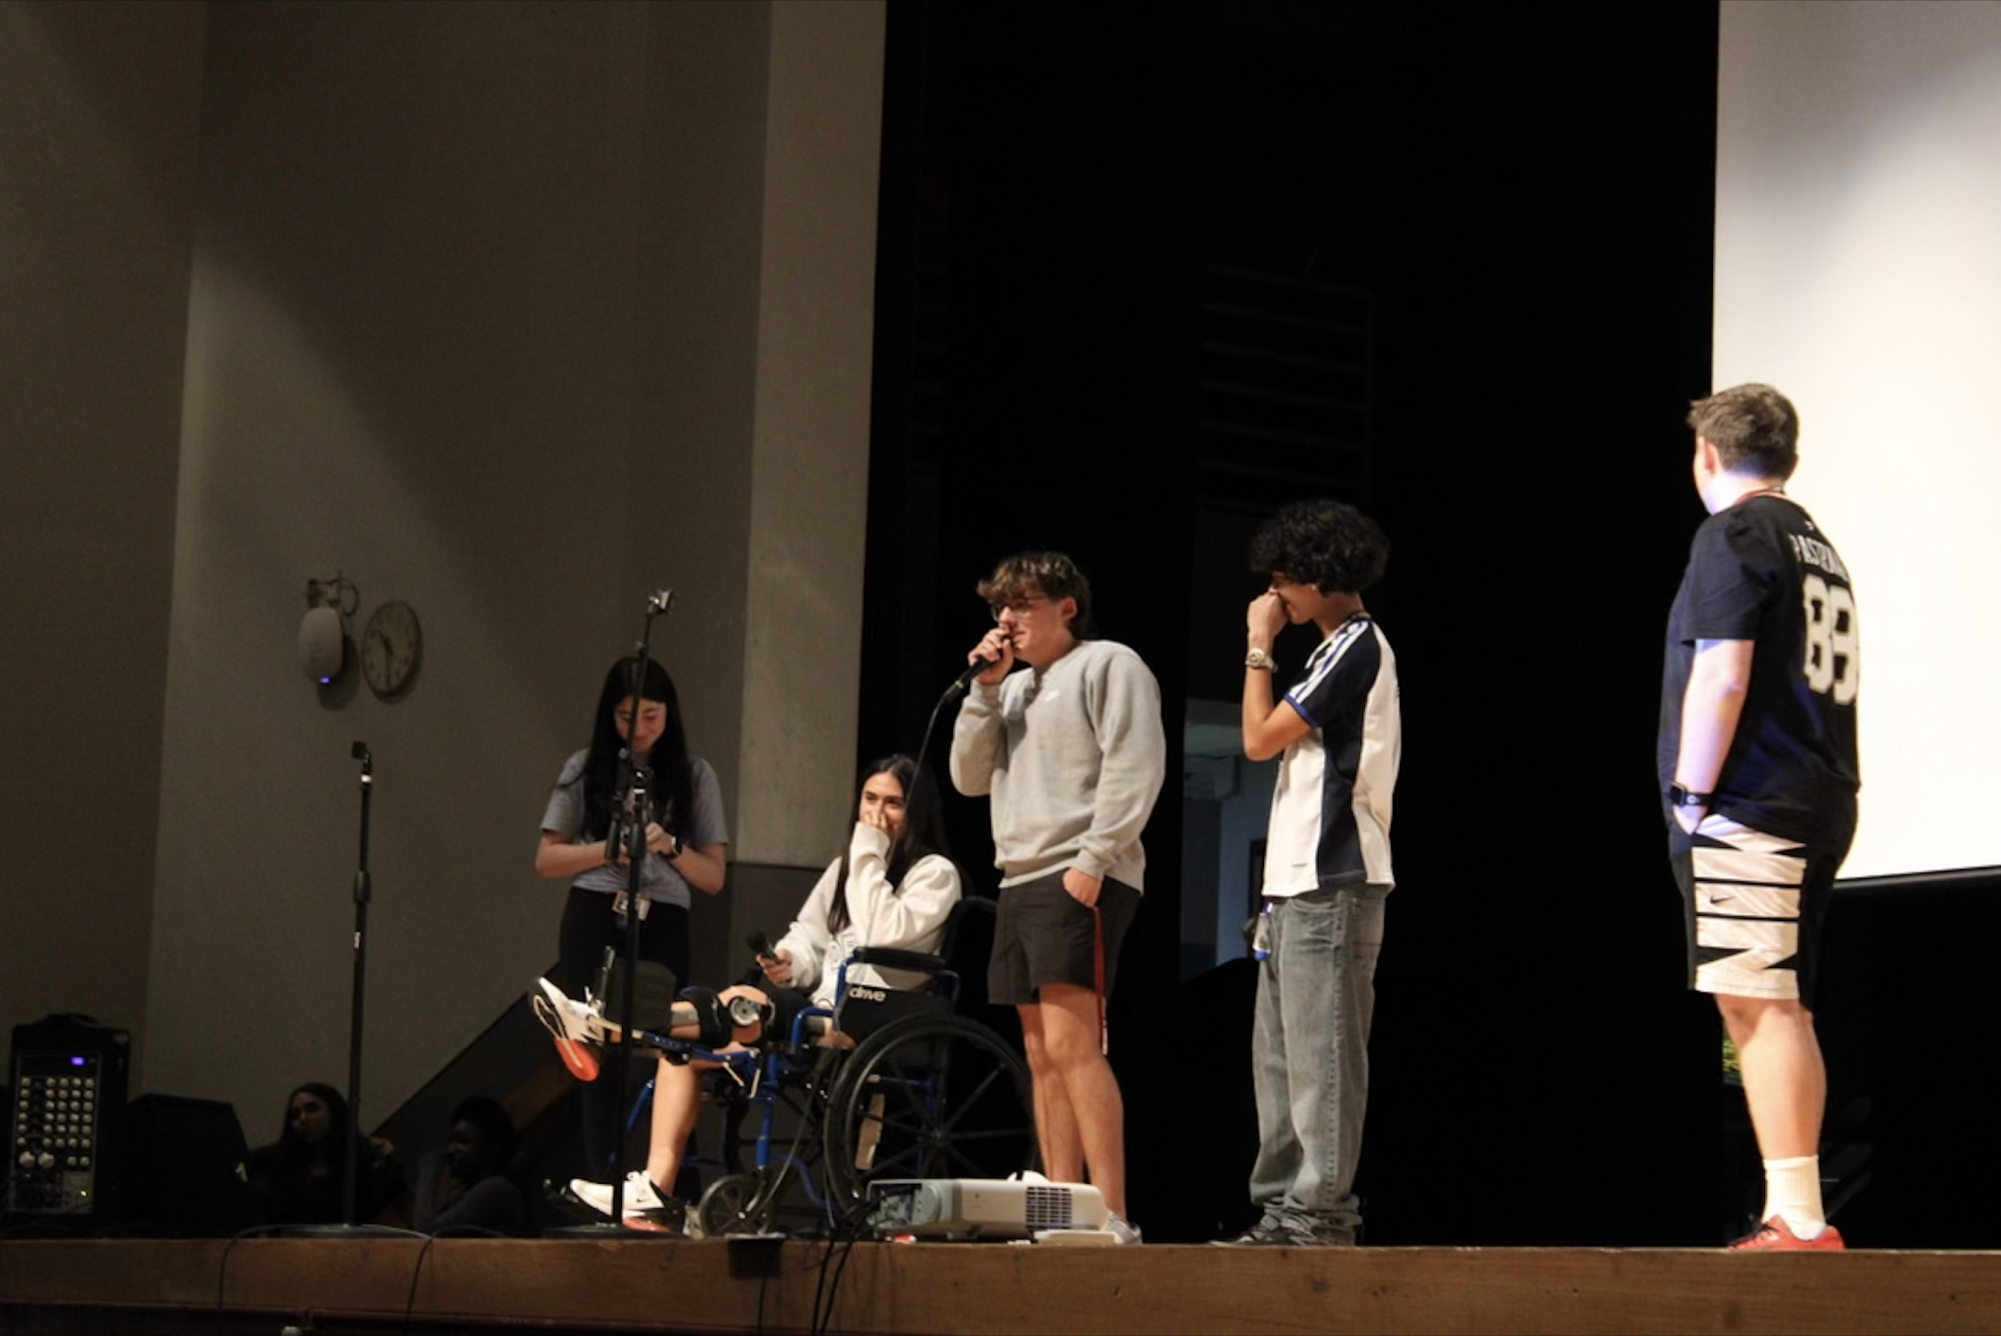 Senior Joey Chiera tells a joke on the auditorium stage at the Laughter Heals at MSD assembly. The assembly, led by project directors Macy Meis and Kyra Shultz, was held to inform students of the healing benefits of laughter and to promote the club.